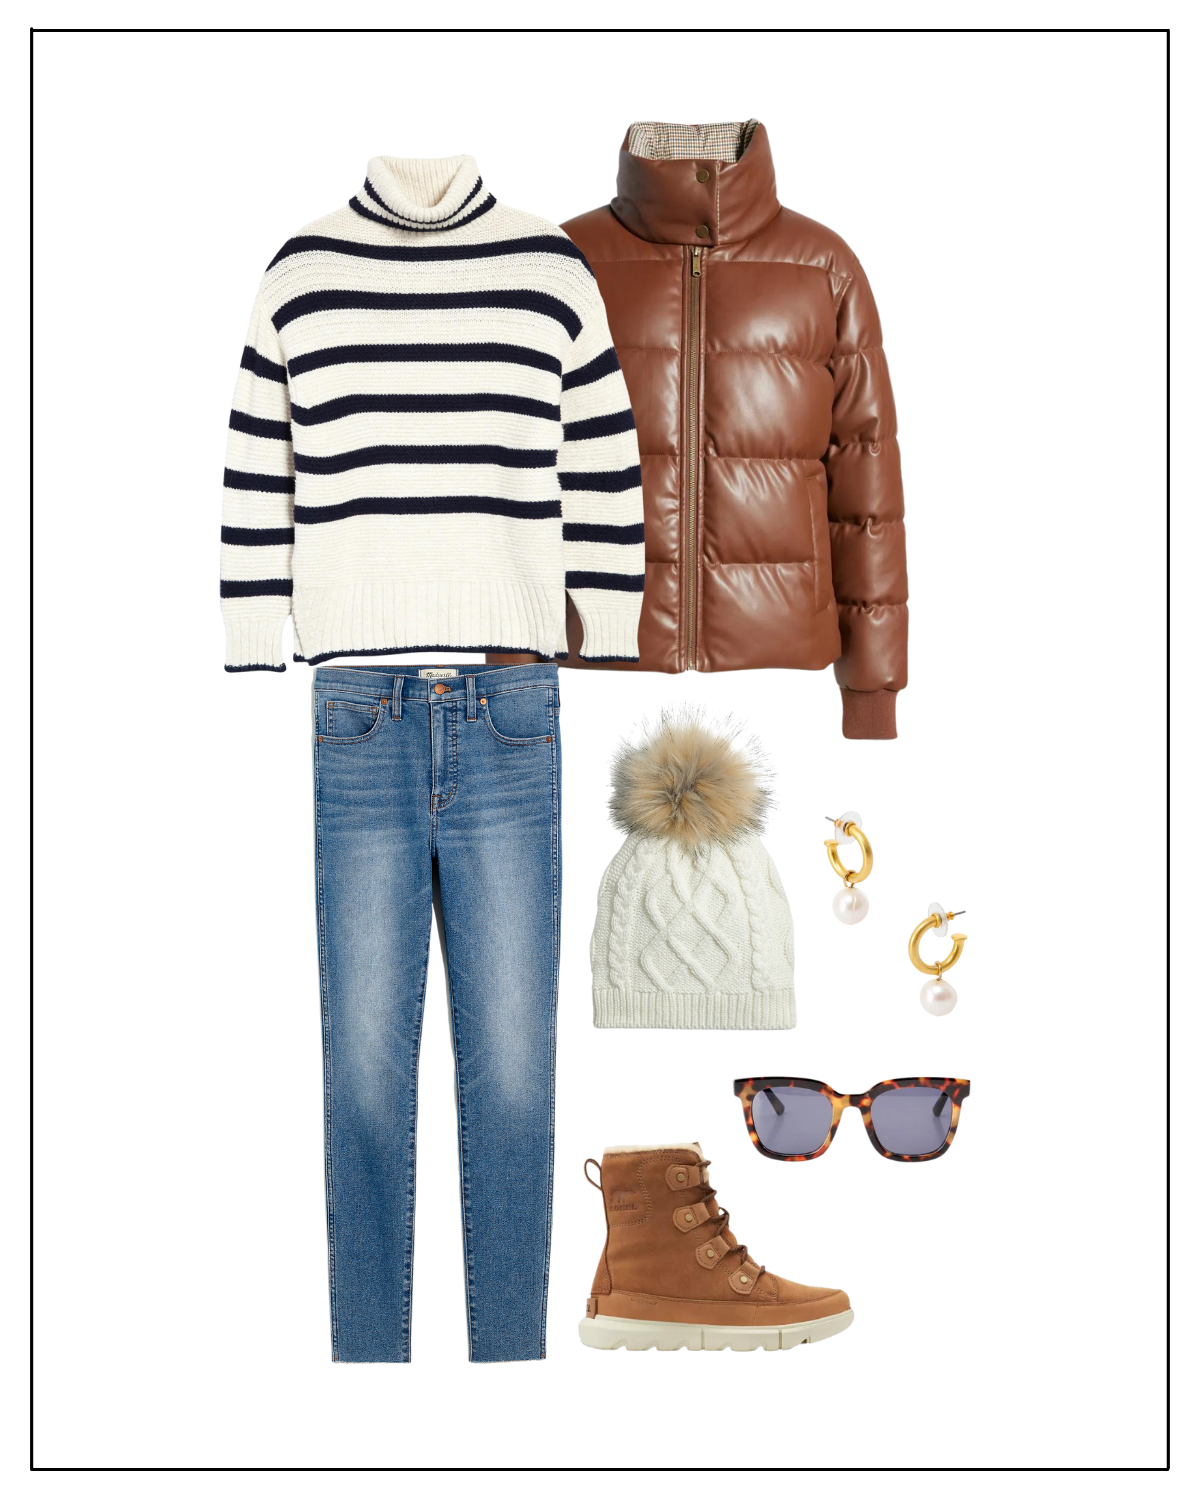 Winter Vacation Outfit Ideas - Cozy & Casual.